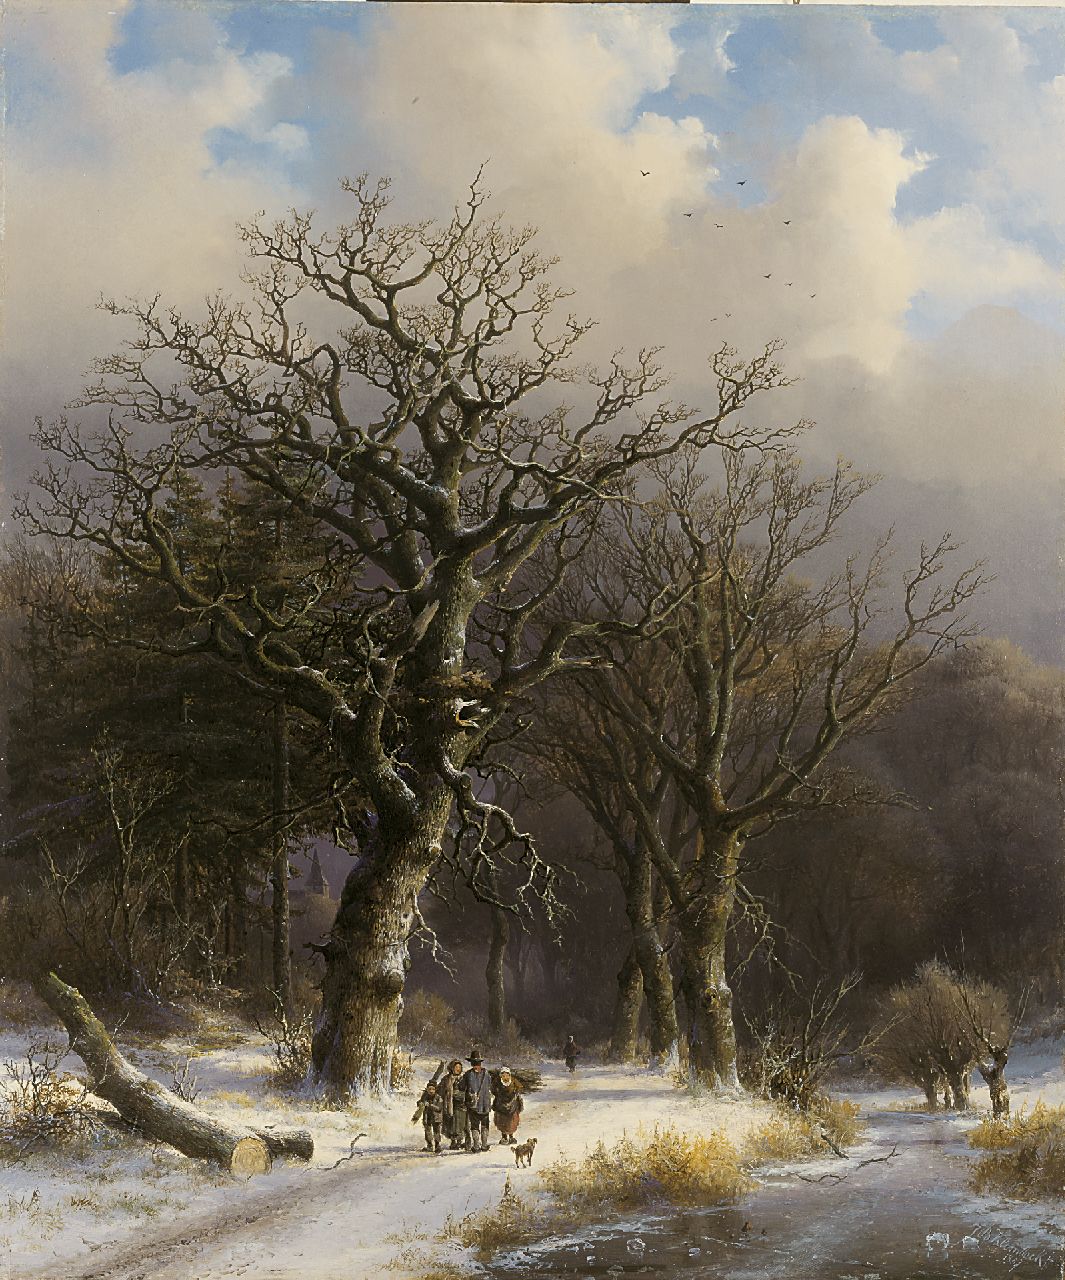 Klombeck J.B.  | Johann Bernard Klombeck, Oak forest with wood gatherers in winter, oil on panel 69.6 x 58.4 cm, signed l.r. and dated 1857